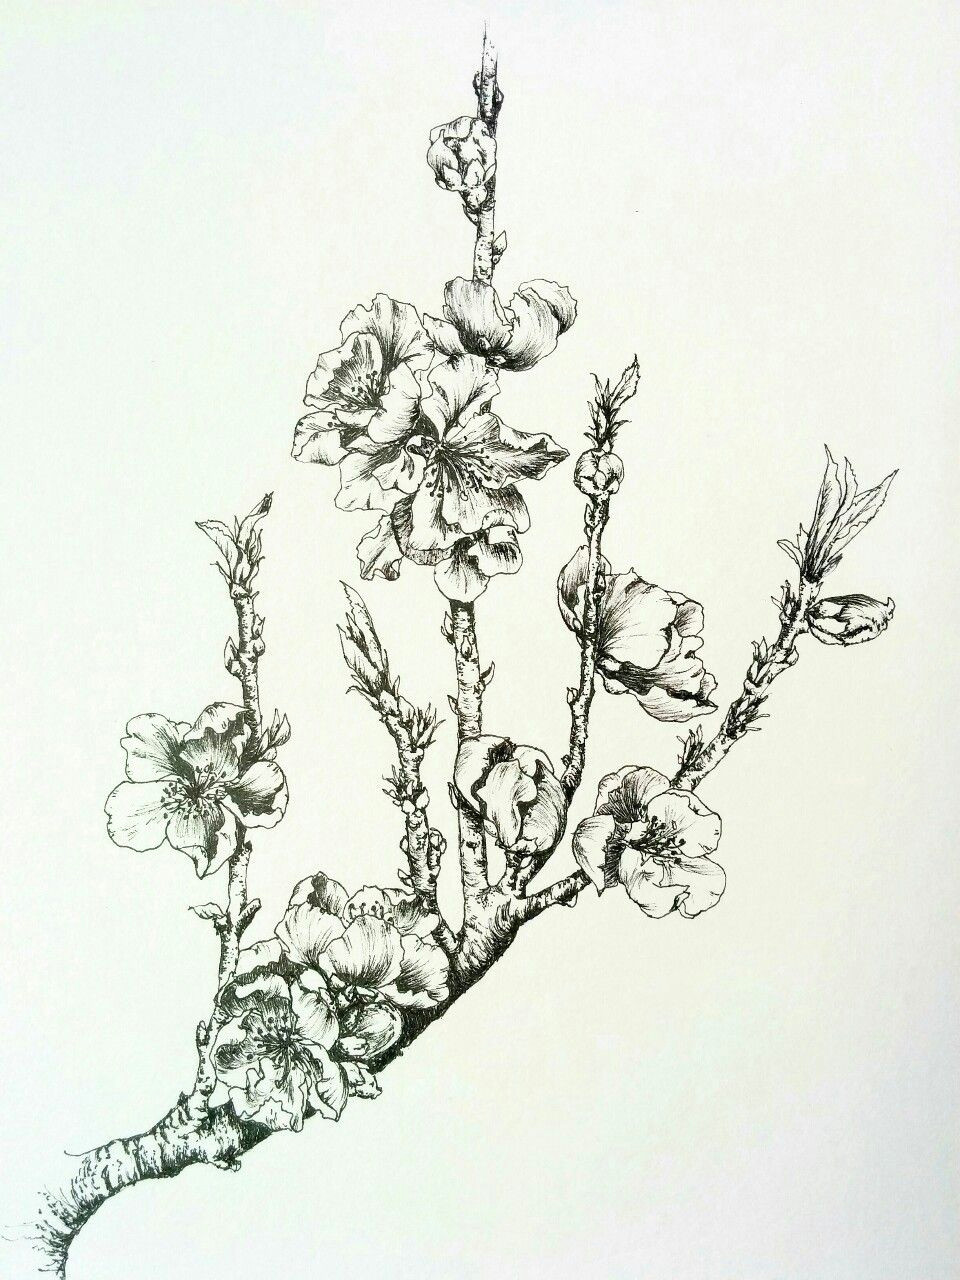 Drawing Flowers and Fruits Nectarine Blossoms Lots Of Flower Buds at the Moment Hoping for A